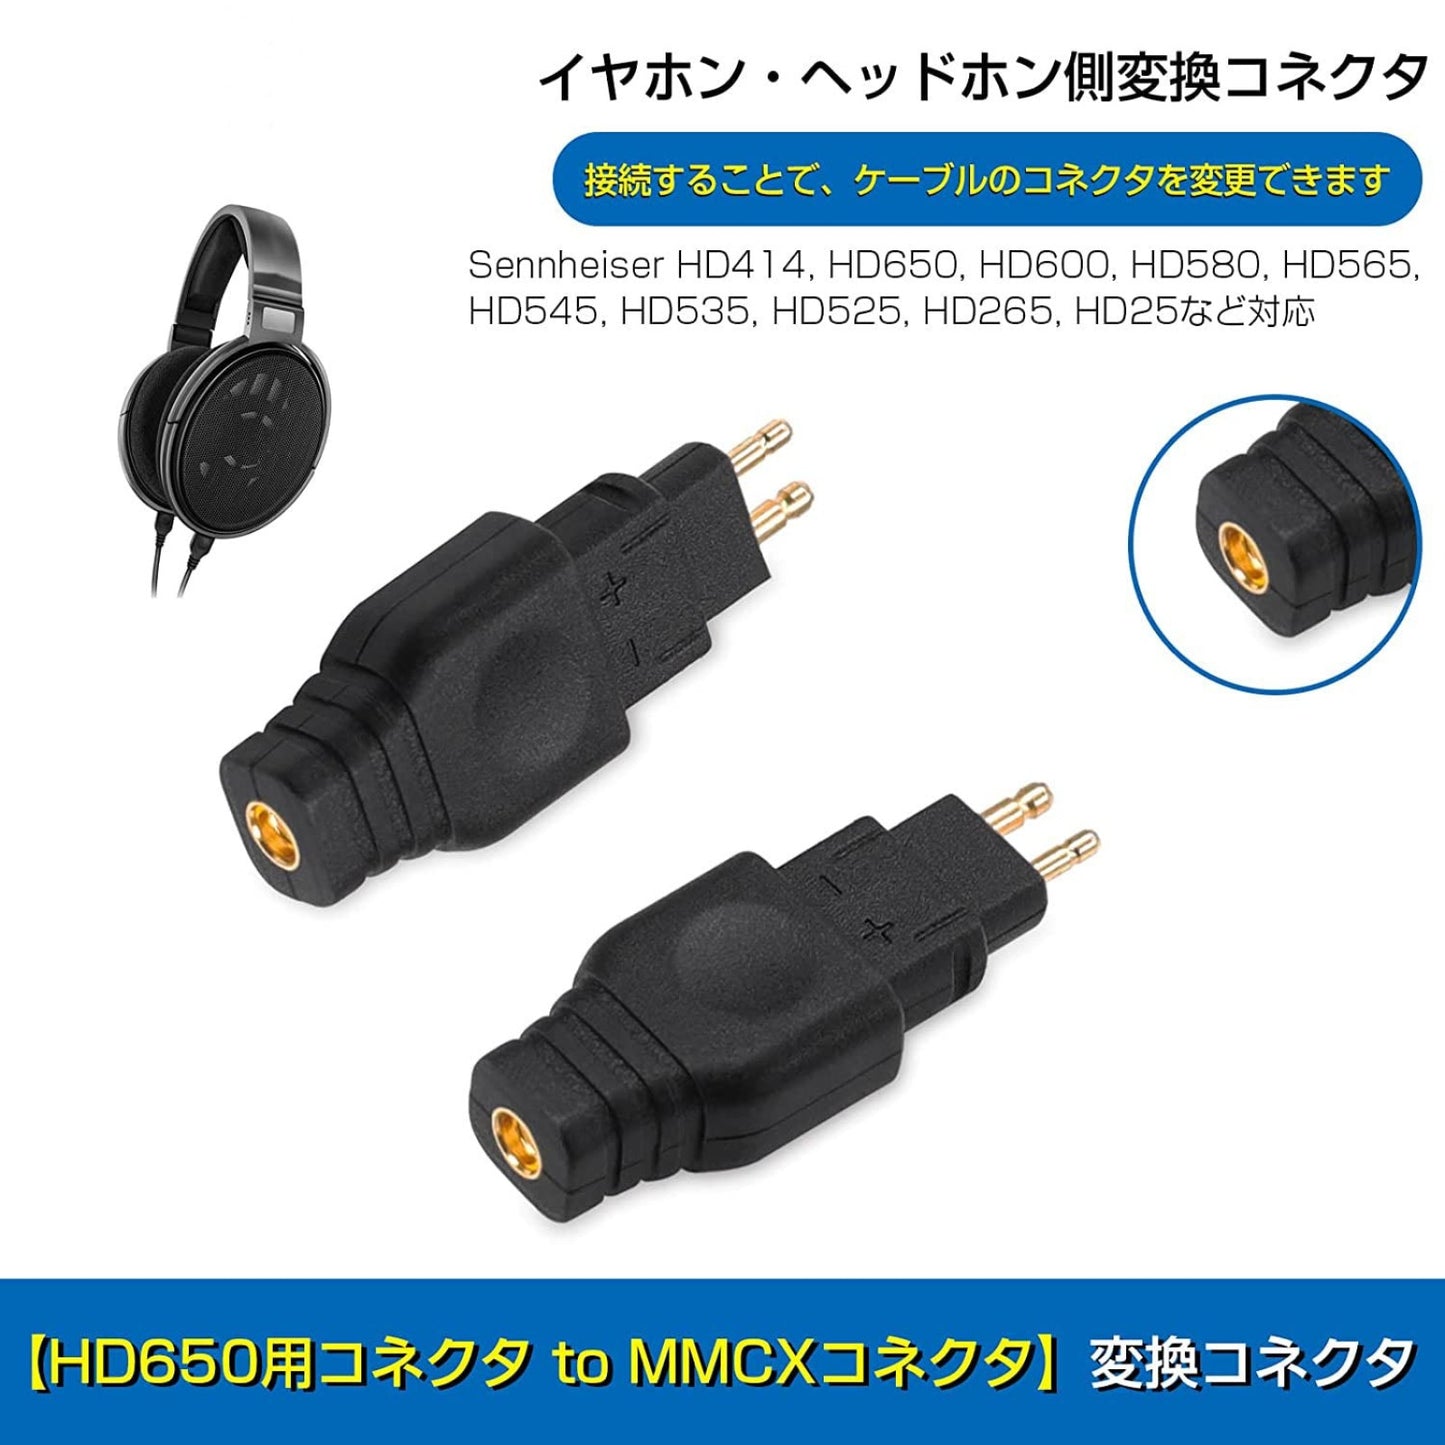 cooyin HD580-MMCX 変換コネクター コネクターキット ゼンハイザー用 HD580（オス） to MMCXコネクタ（メス） HD650・HD600・HD565・HD545等に適合 2個セット